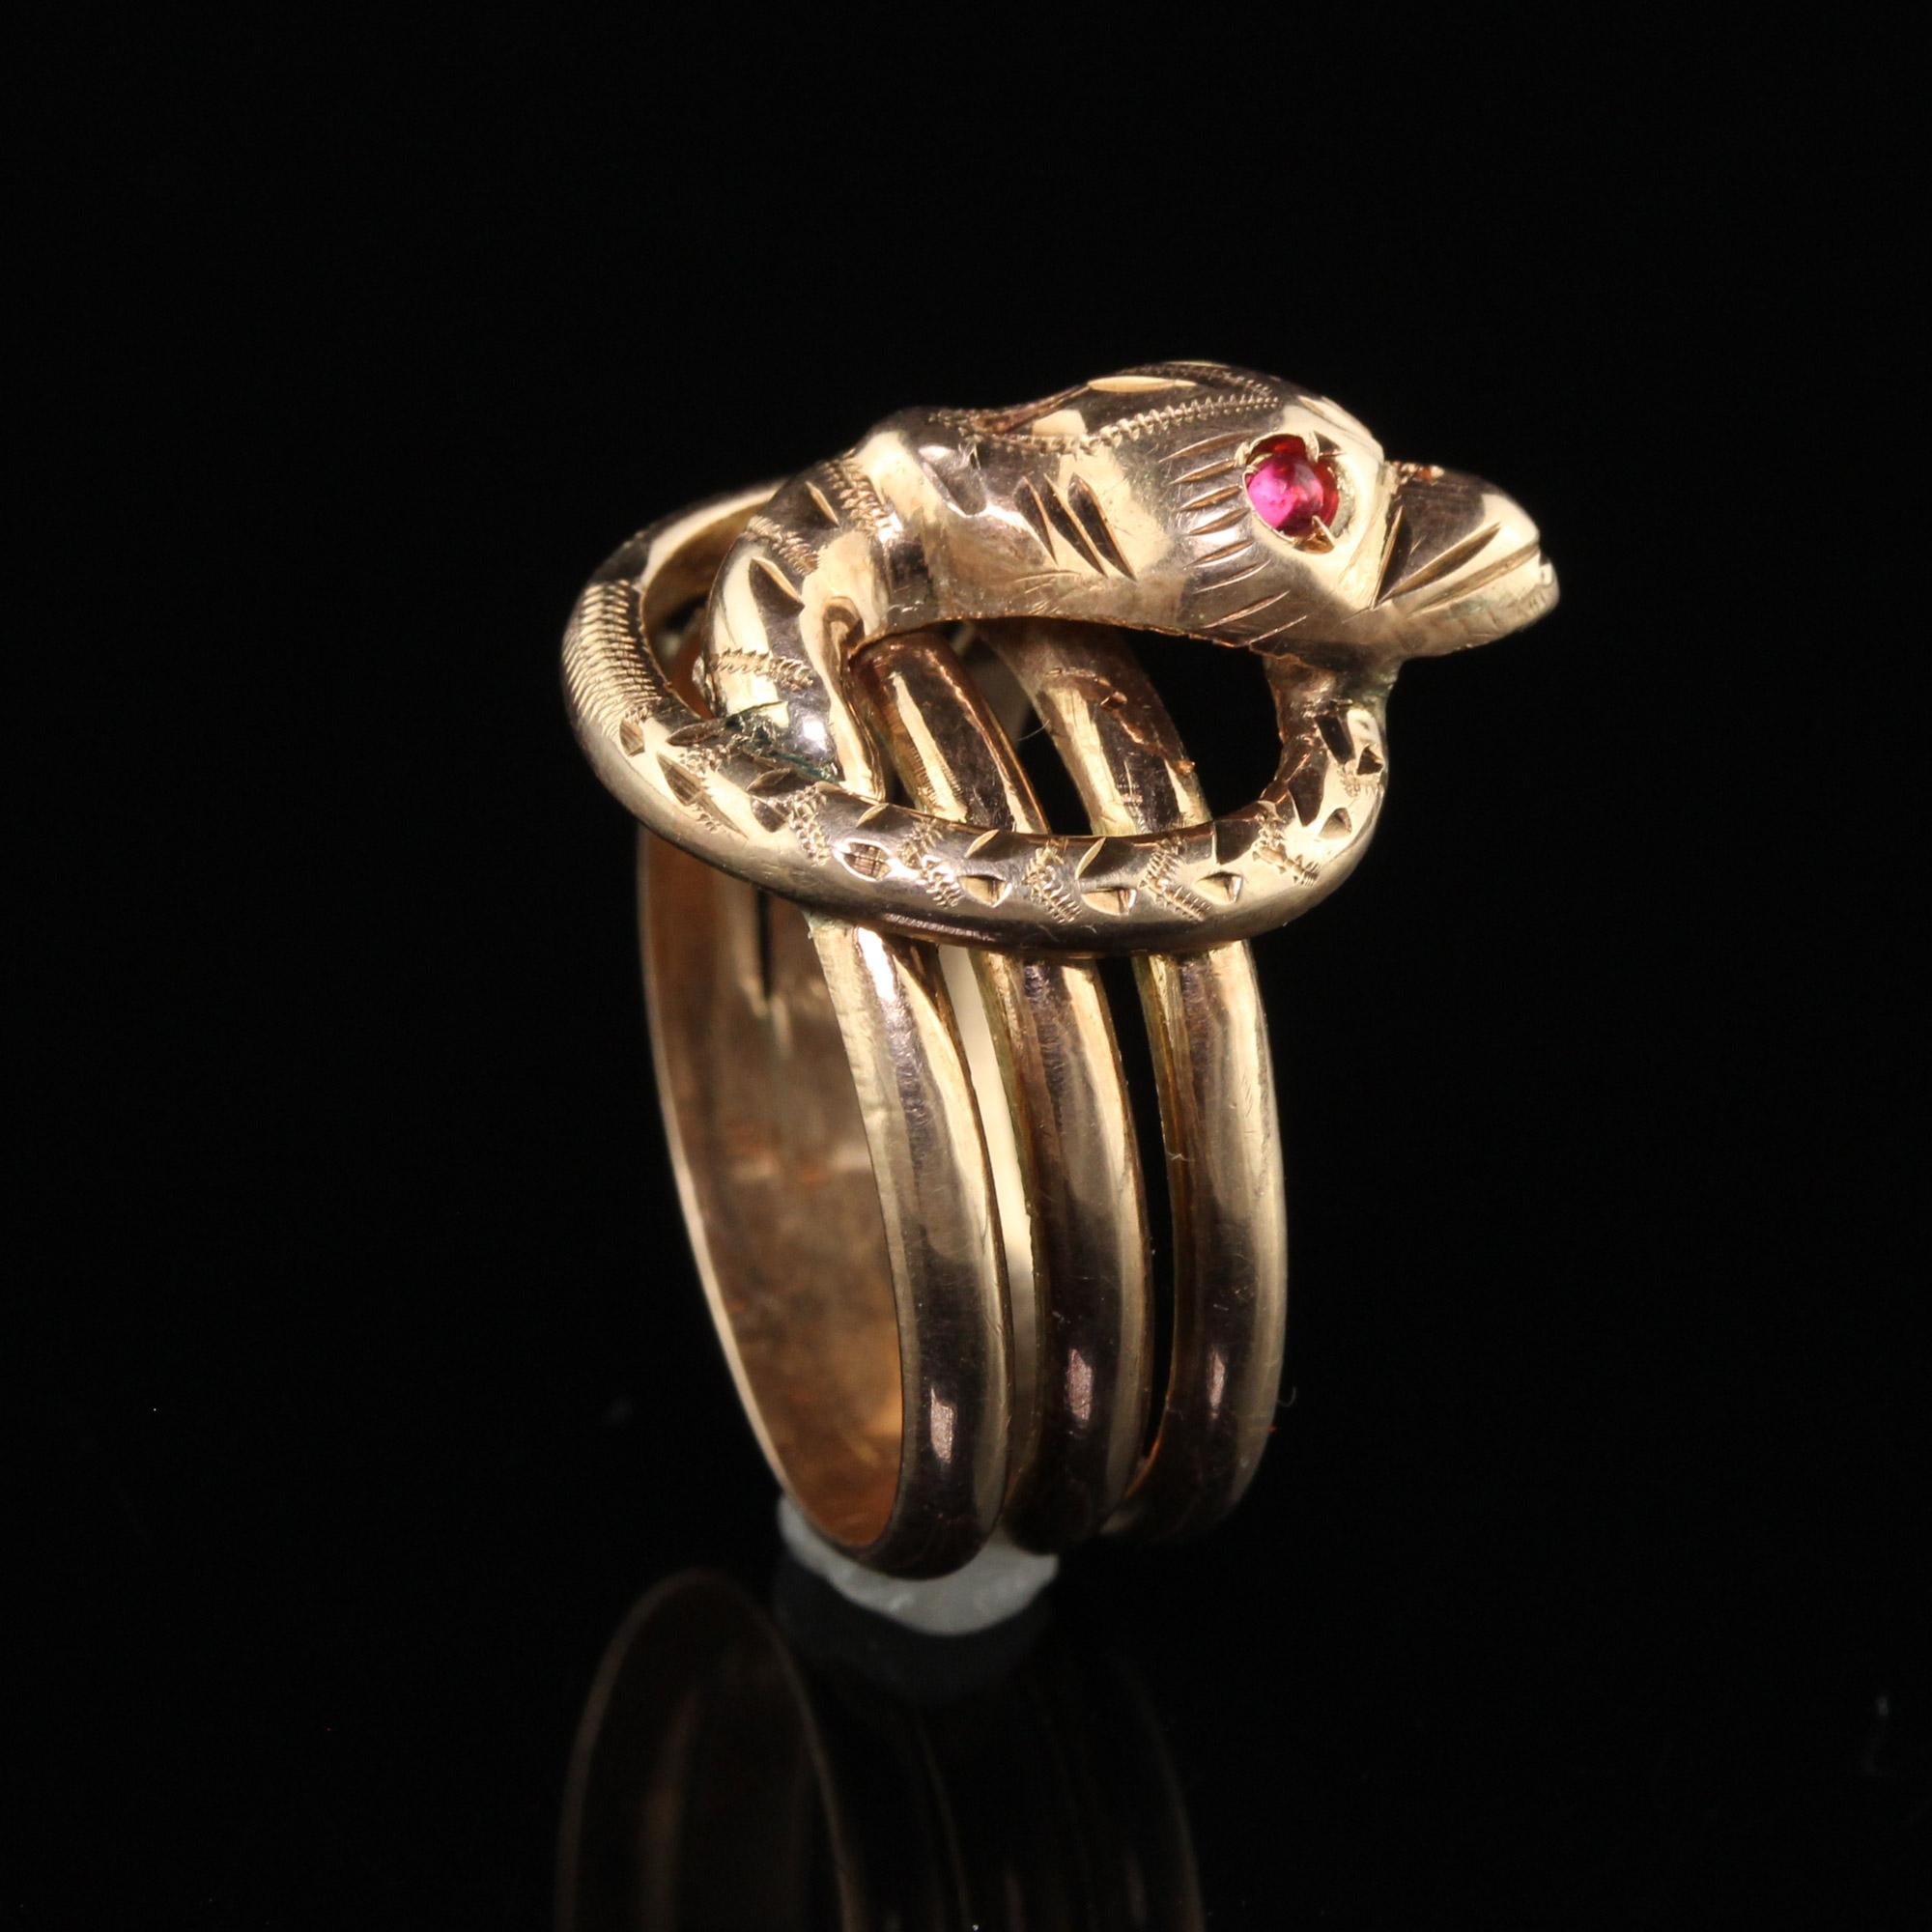 Antique Victorian 12K Yellow Gold Wide Snake Ring - Size 8 1/4 2